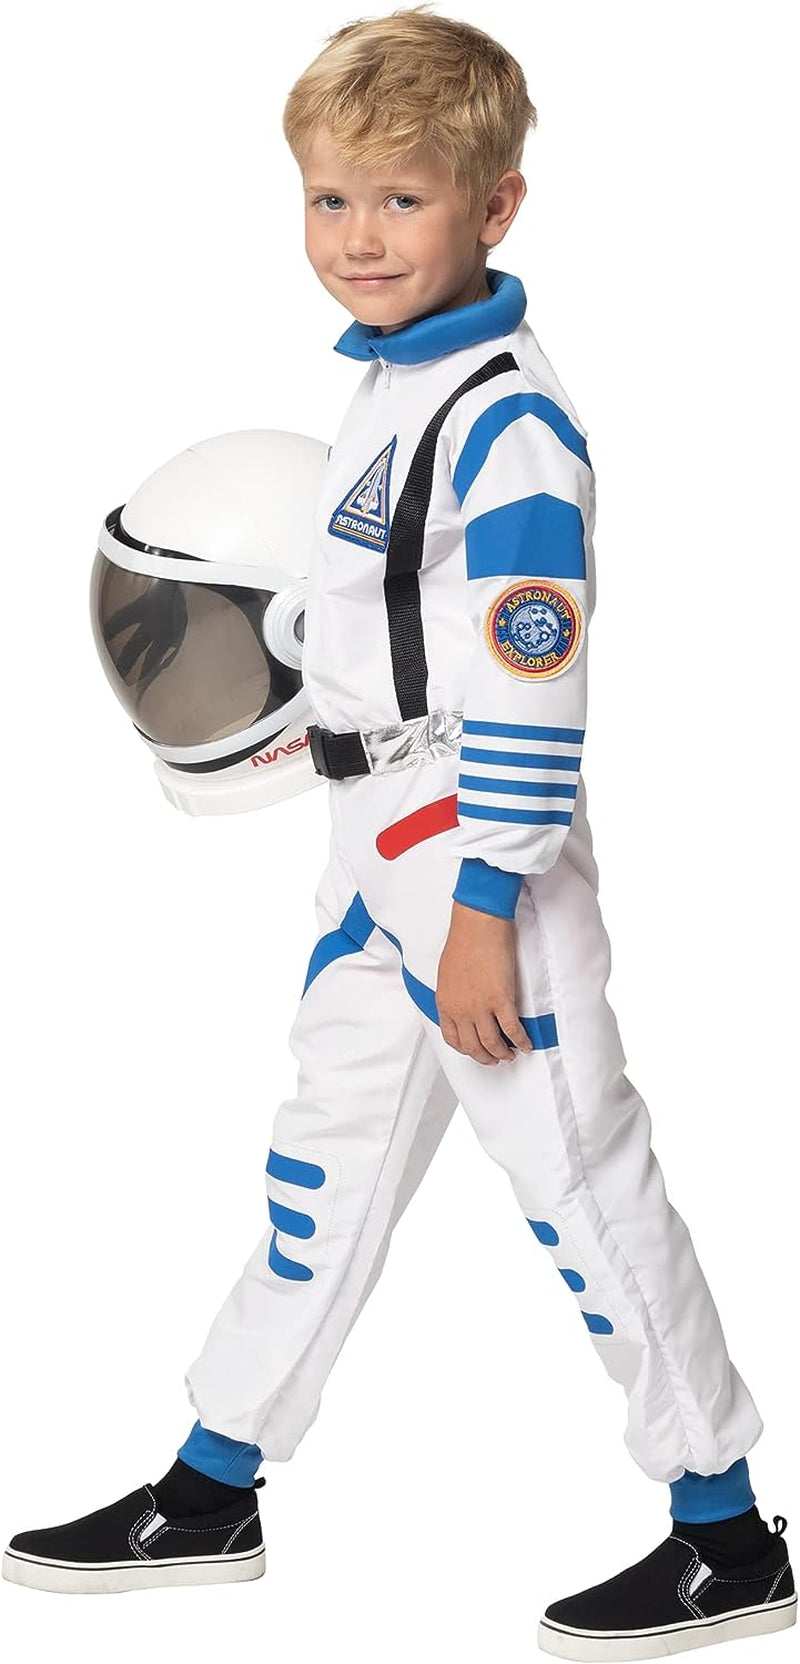 Spooktacular Creations Halloween Child Unisex White Black Details Astronaut Costume for Party Favors (Medium (8-10Yr))  8 years and up   